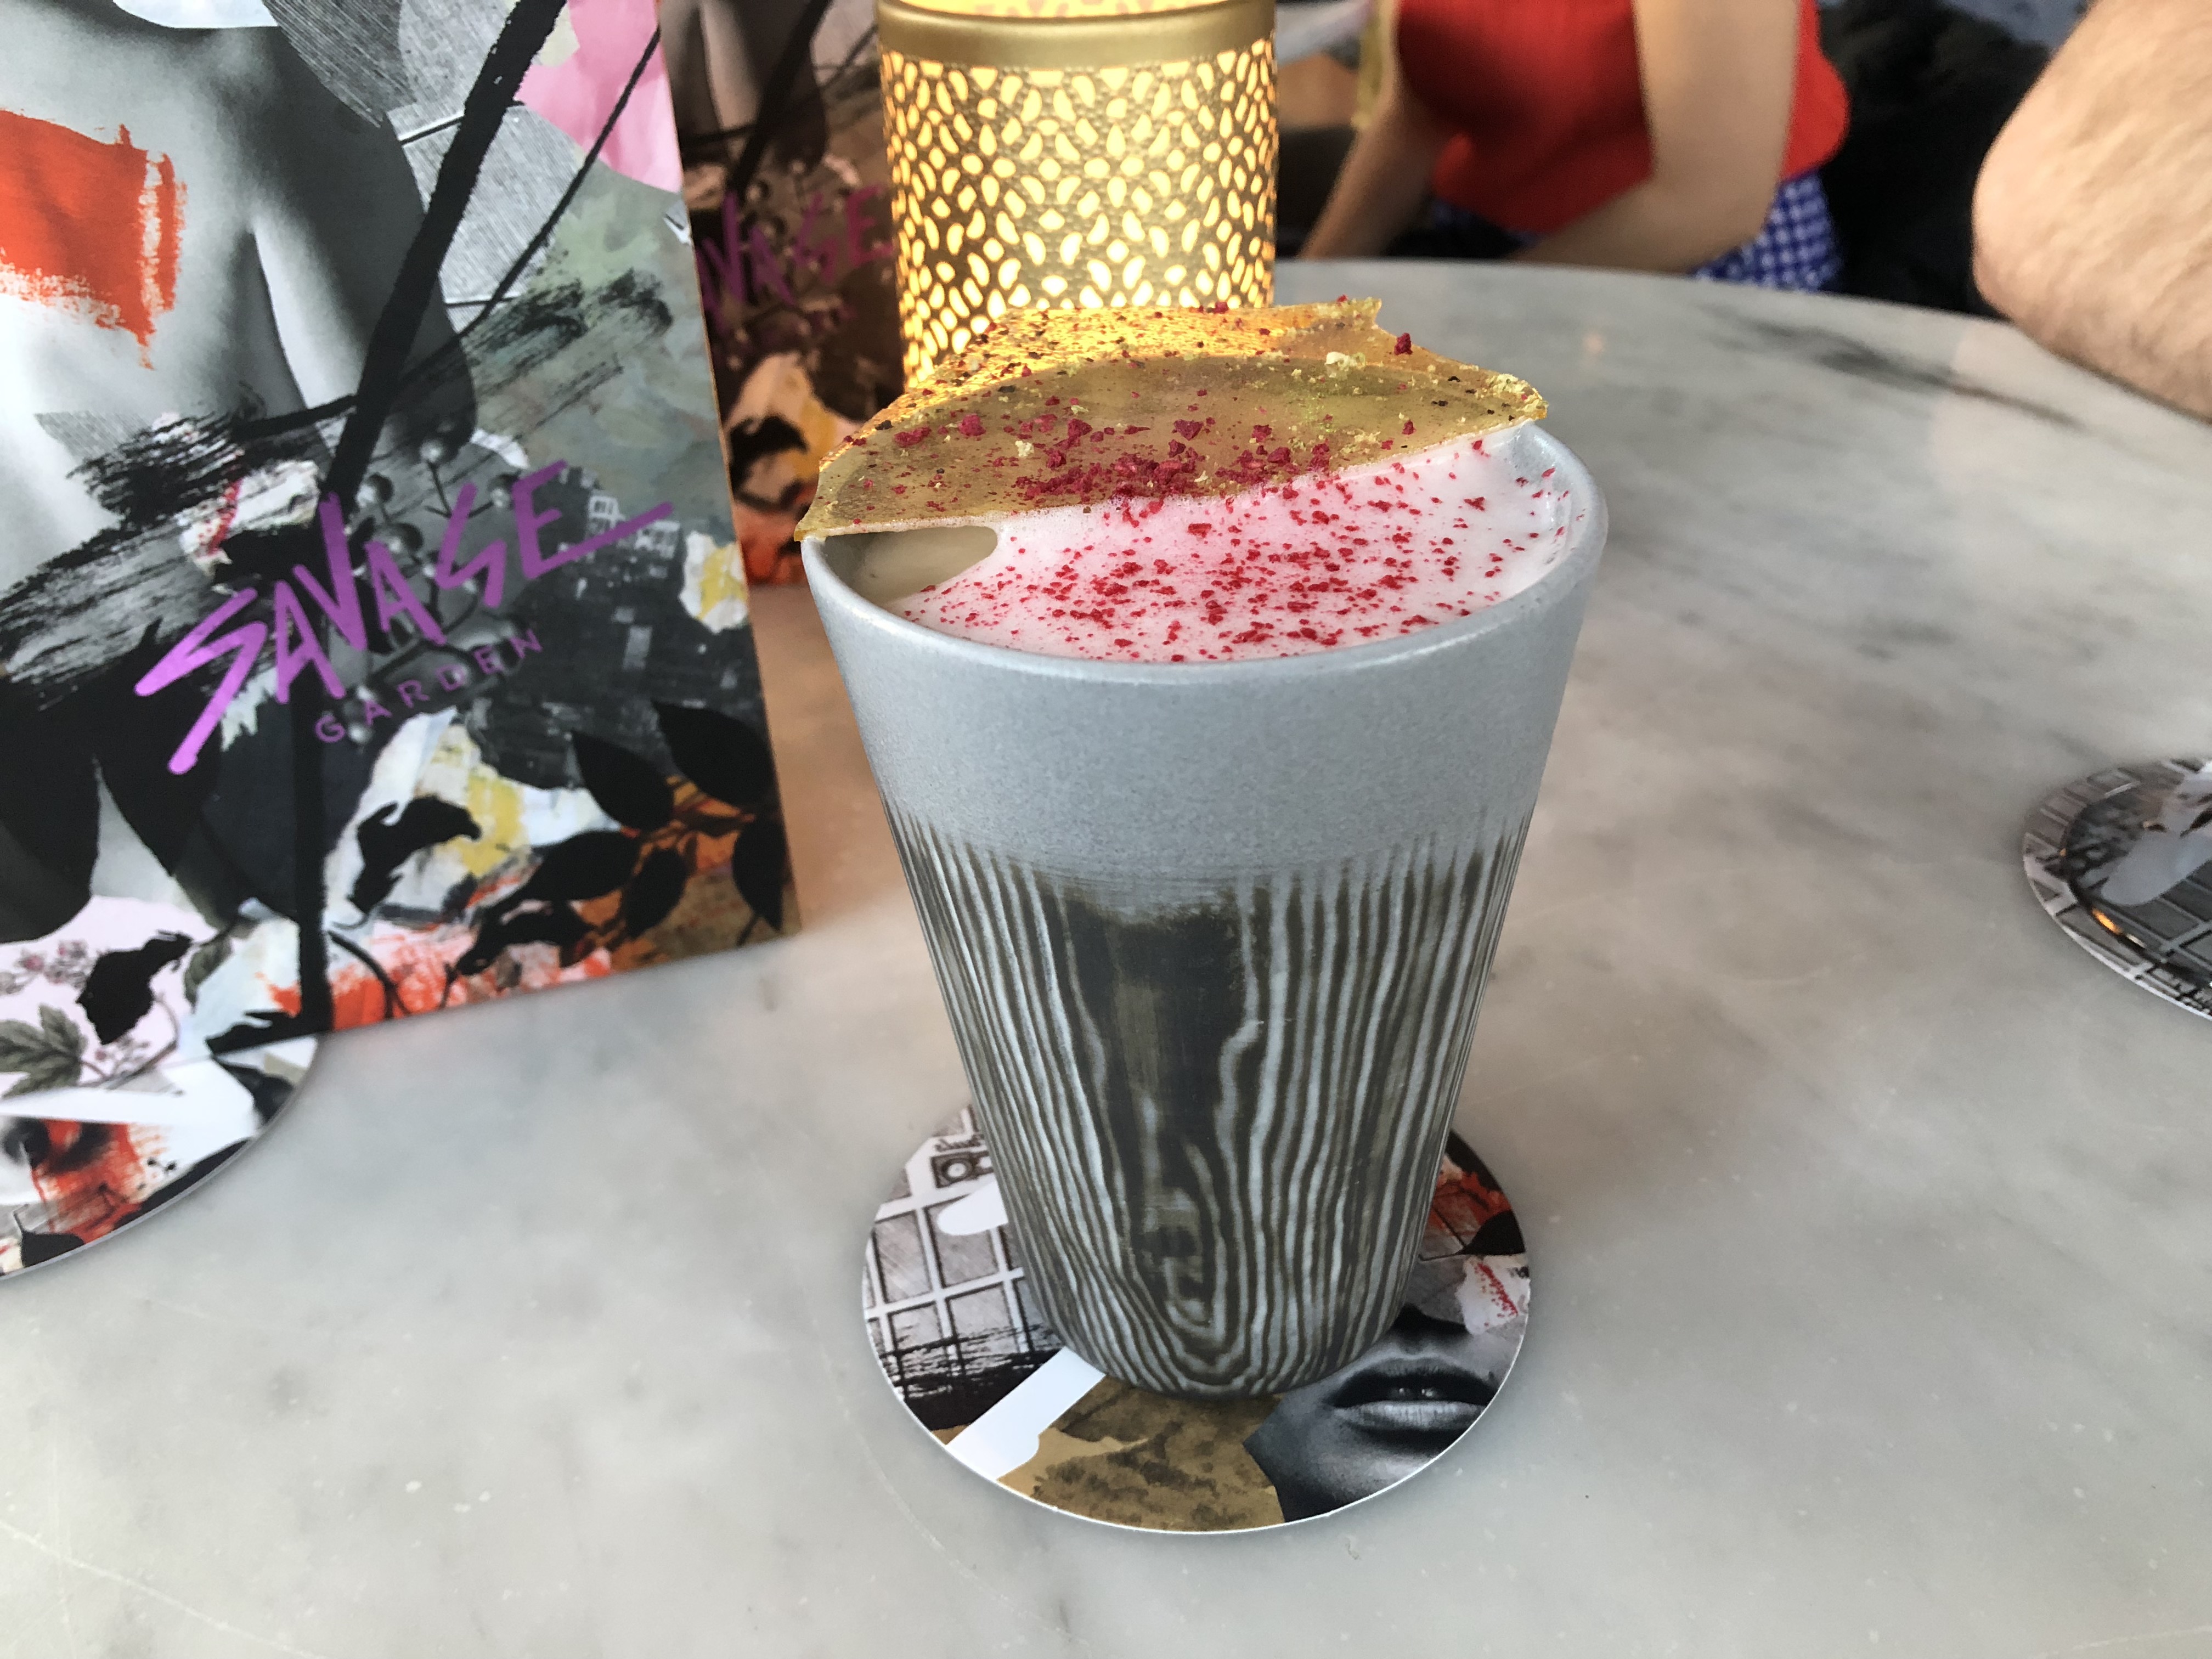 Savage Garden London - This Summer's Sexiest Rooftop Bar: Horny Beast Cocktail